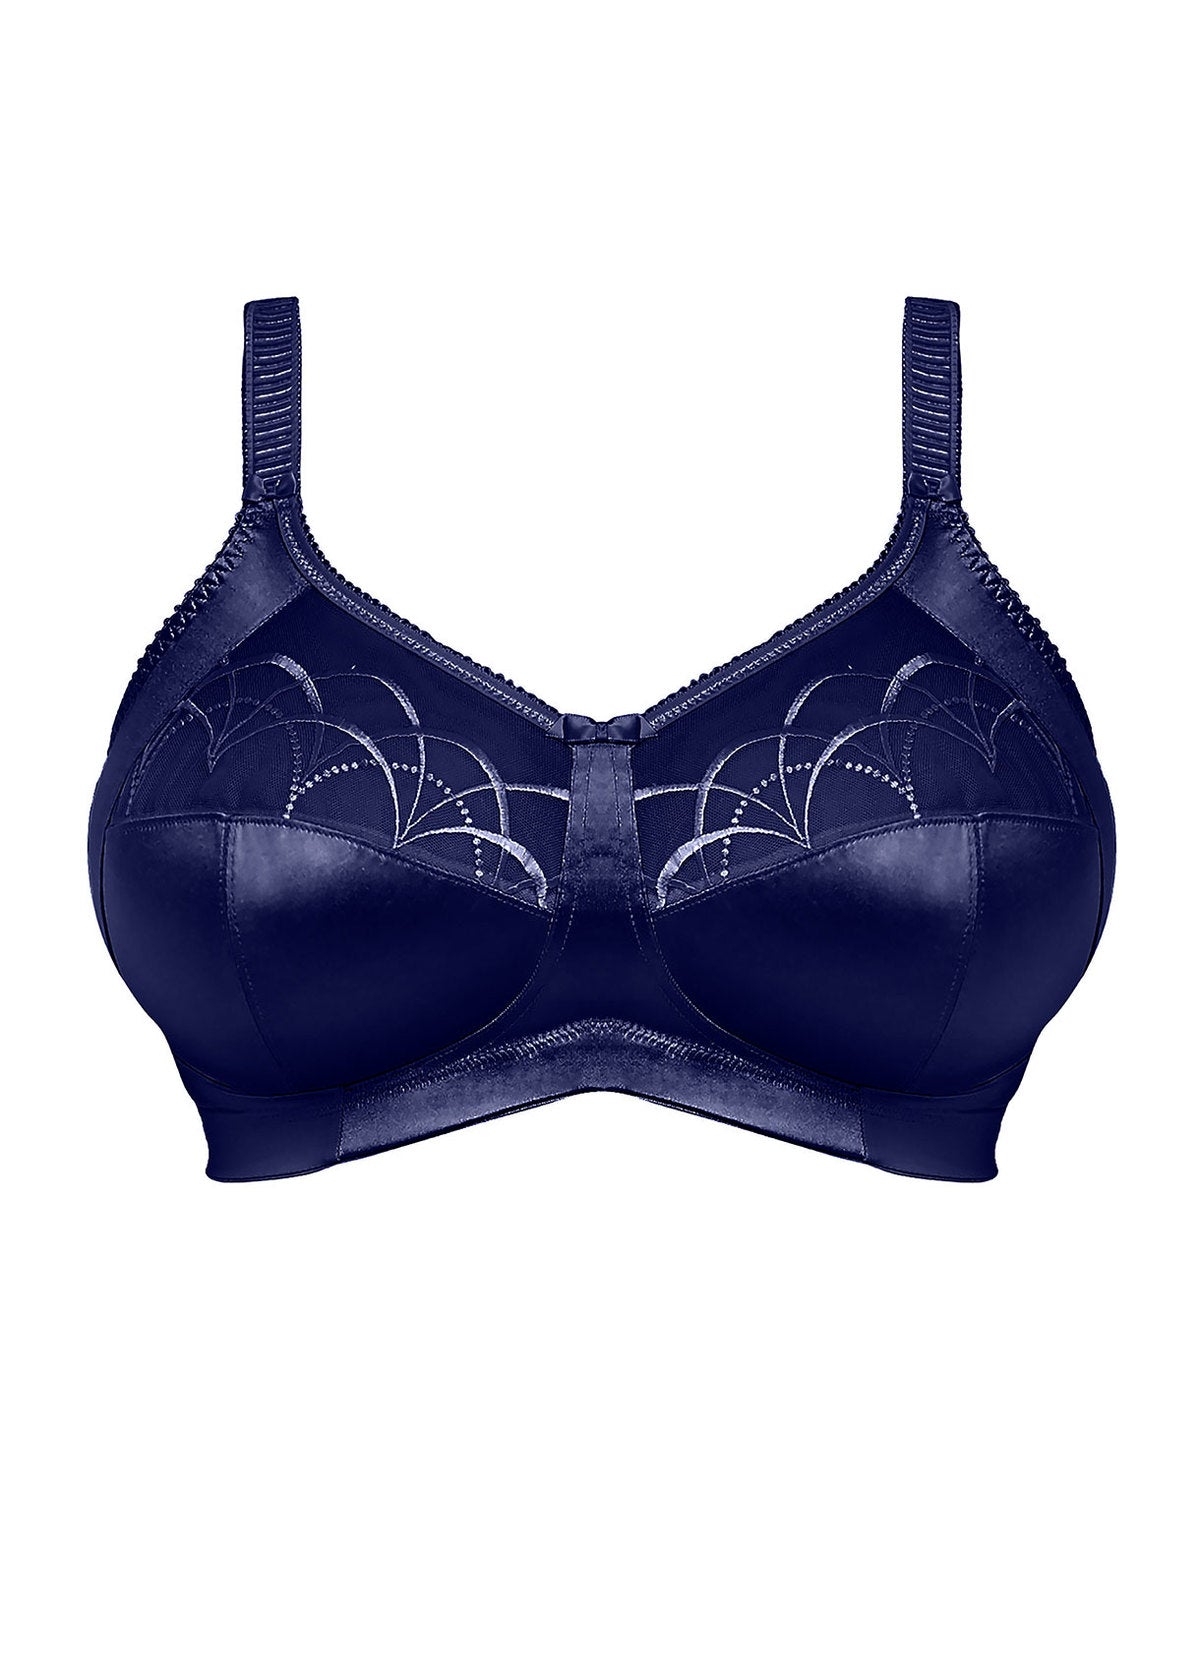 ELOMI CATE SOFT CUP NONWIRE BRA - INK